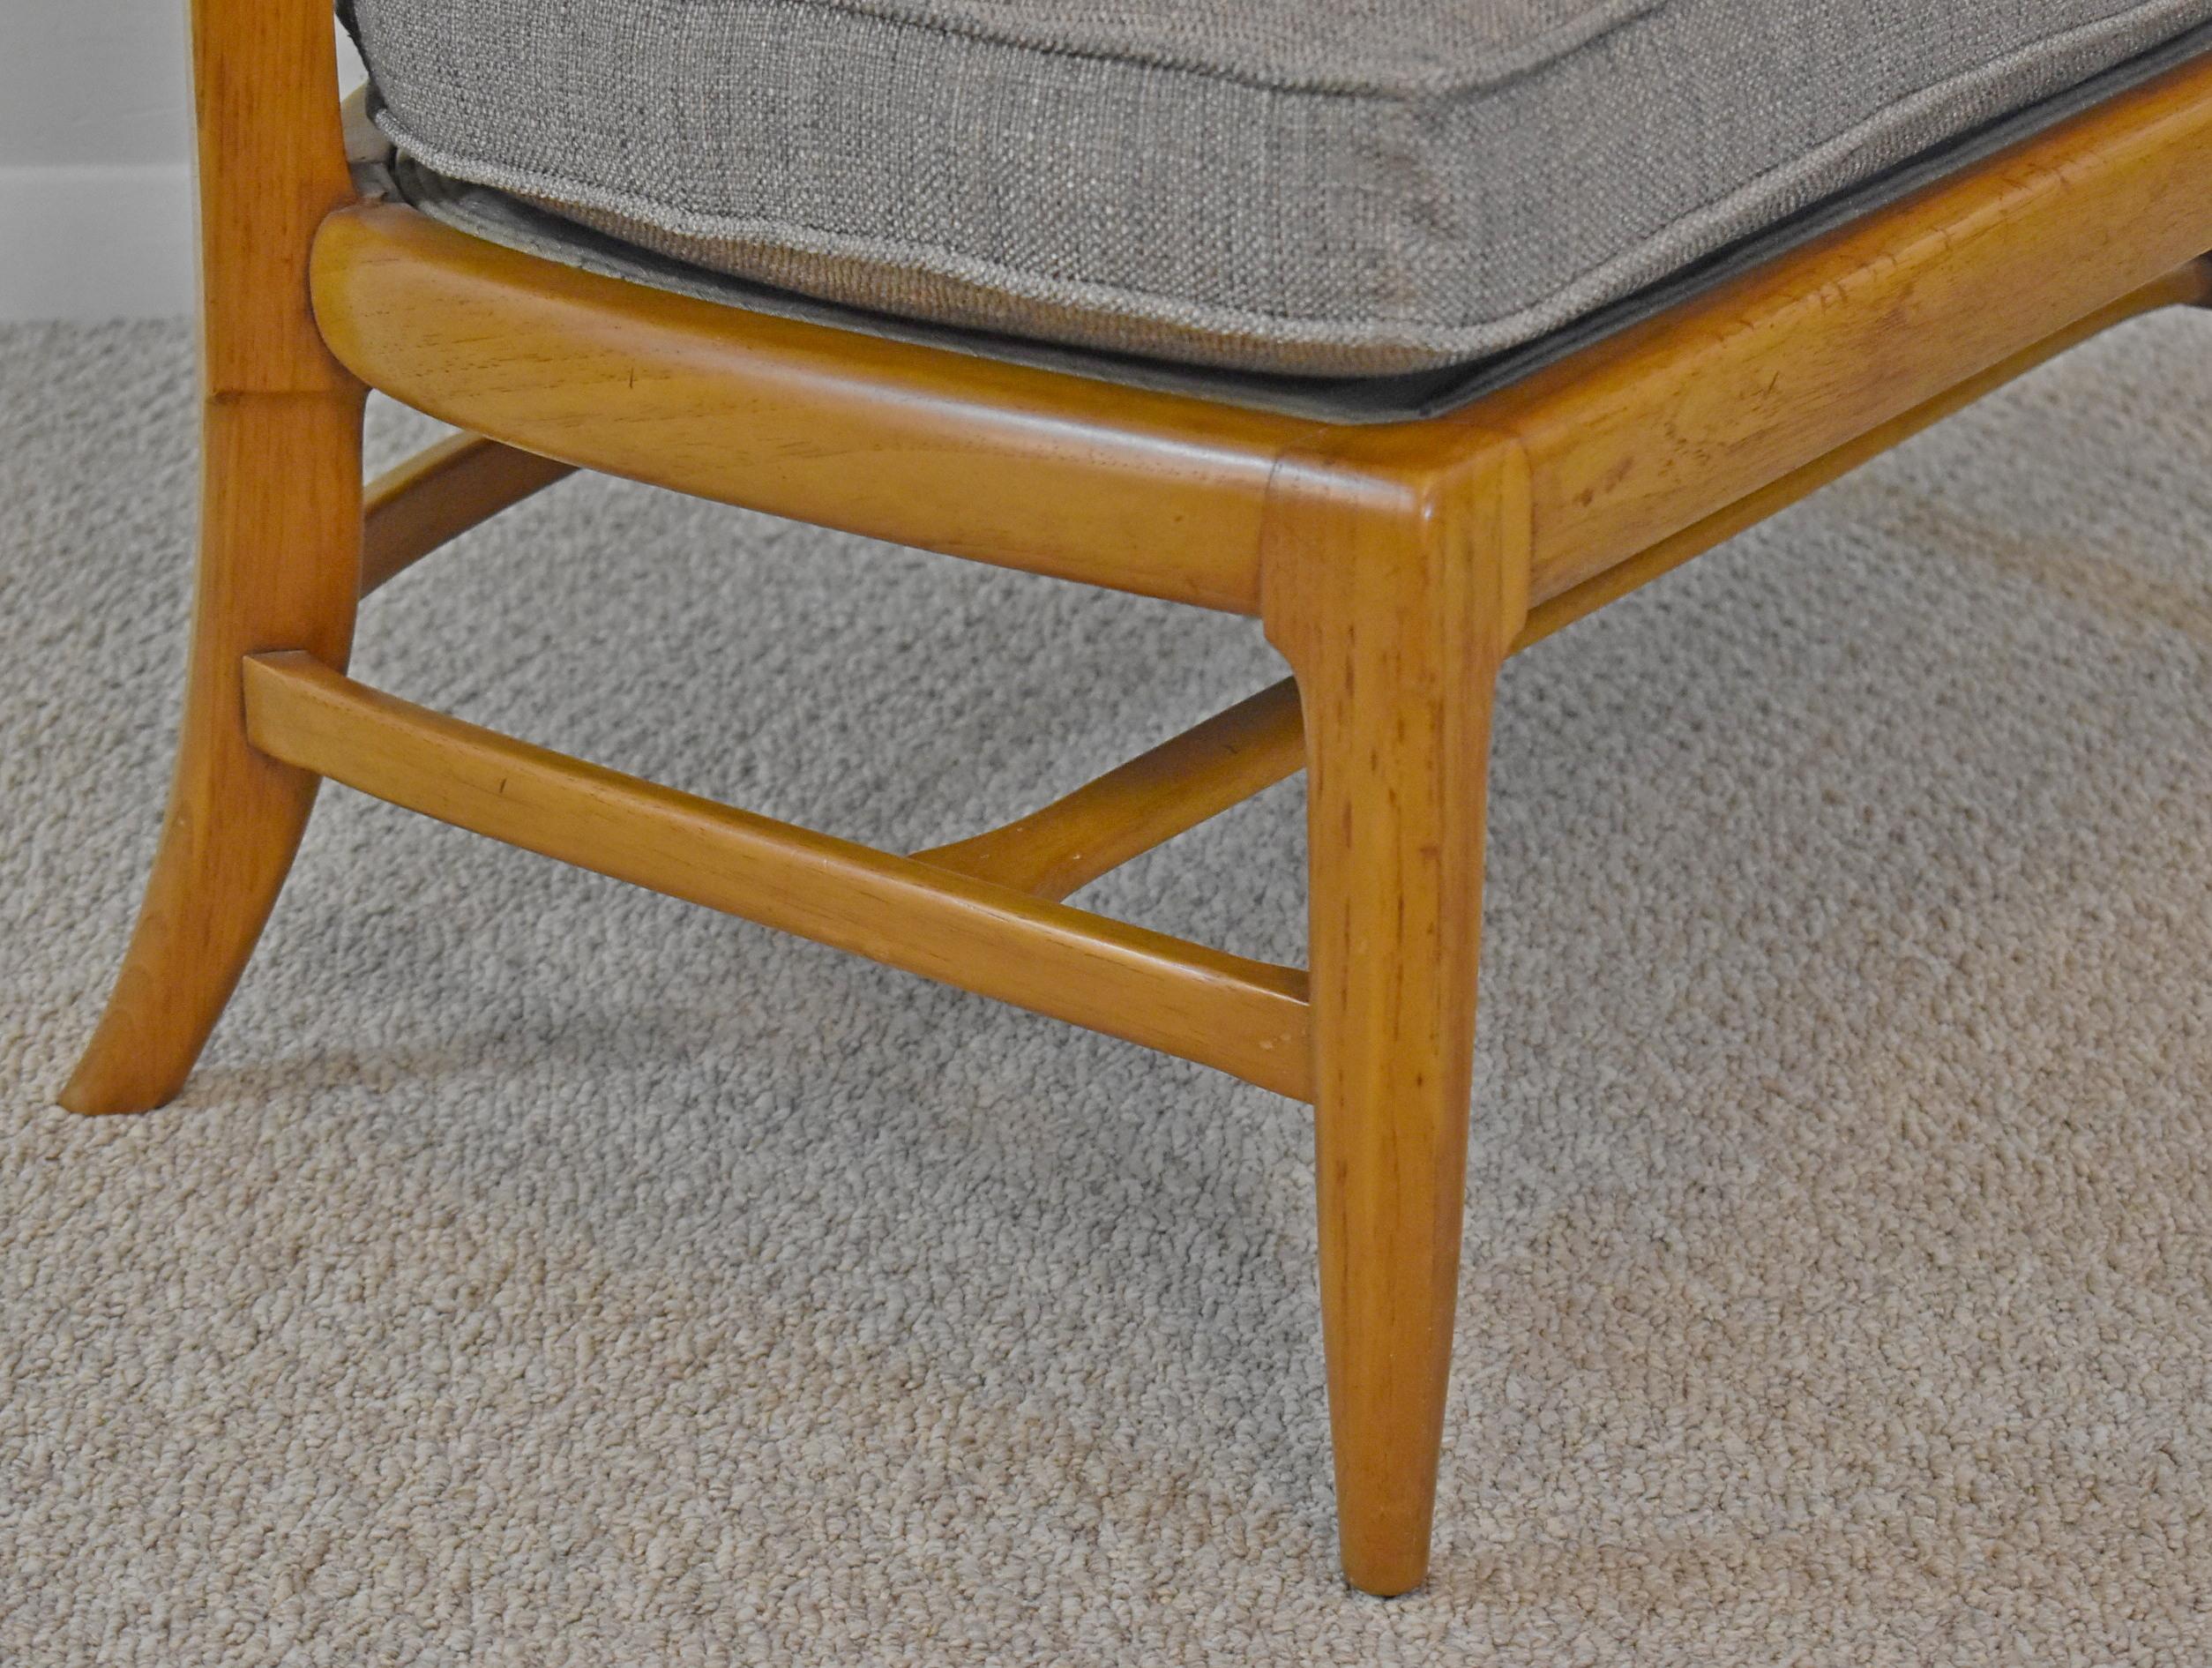 Set of 4 Tomlinson Sophisticate Slipper Chairs In Good Condition For Sale In Toledo, OH